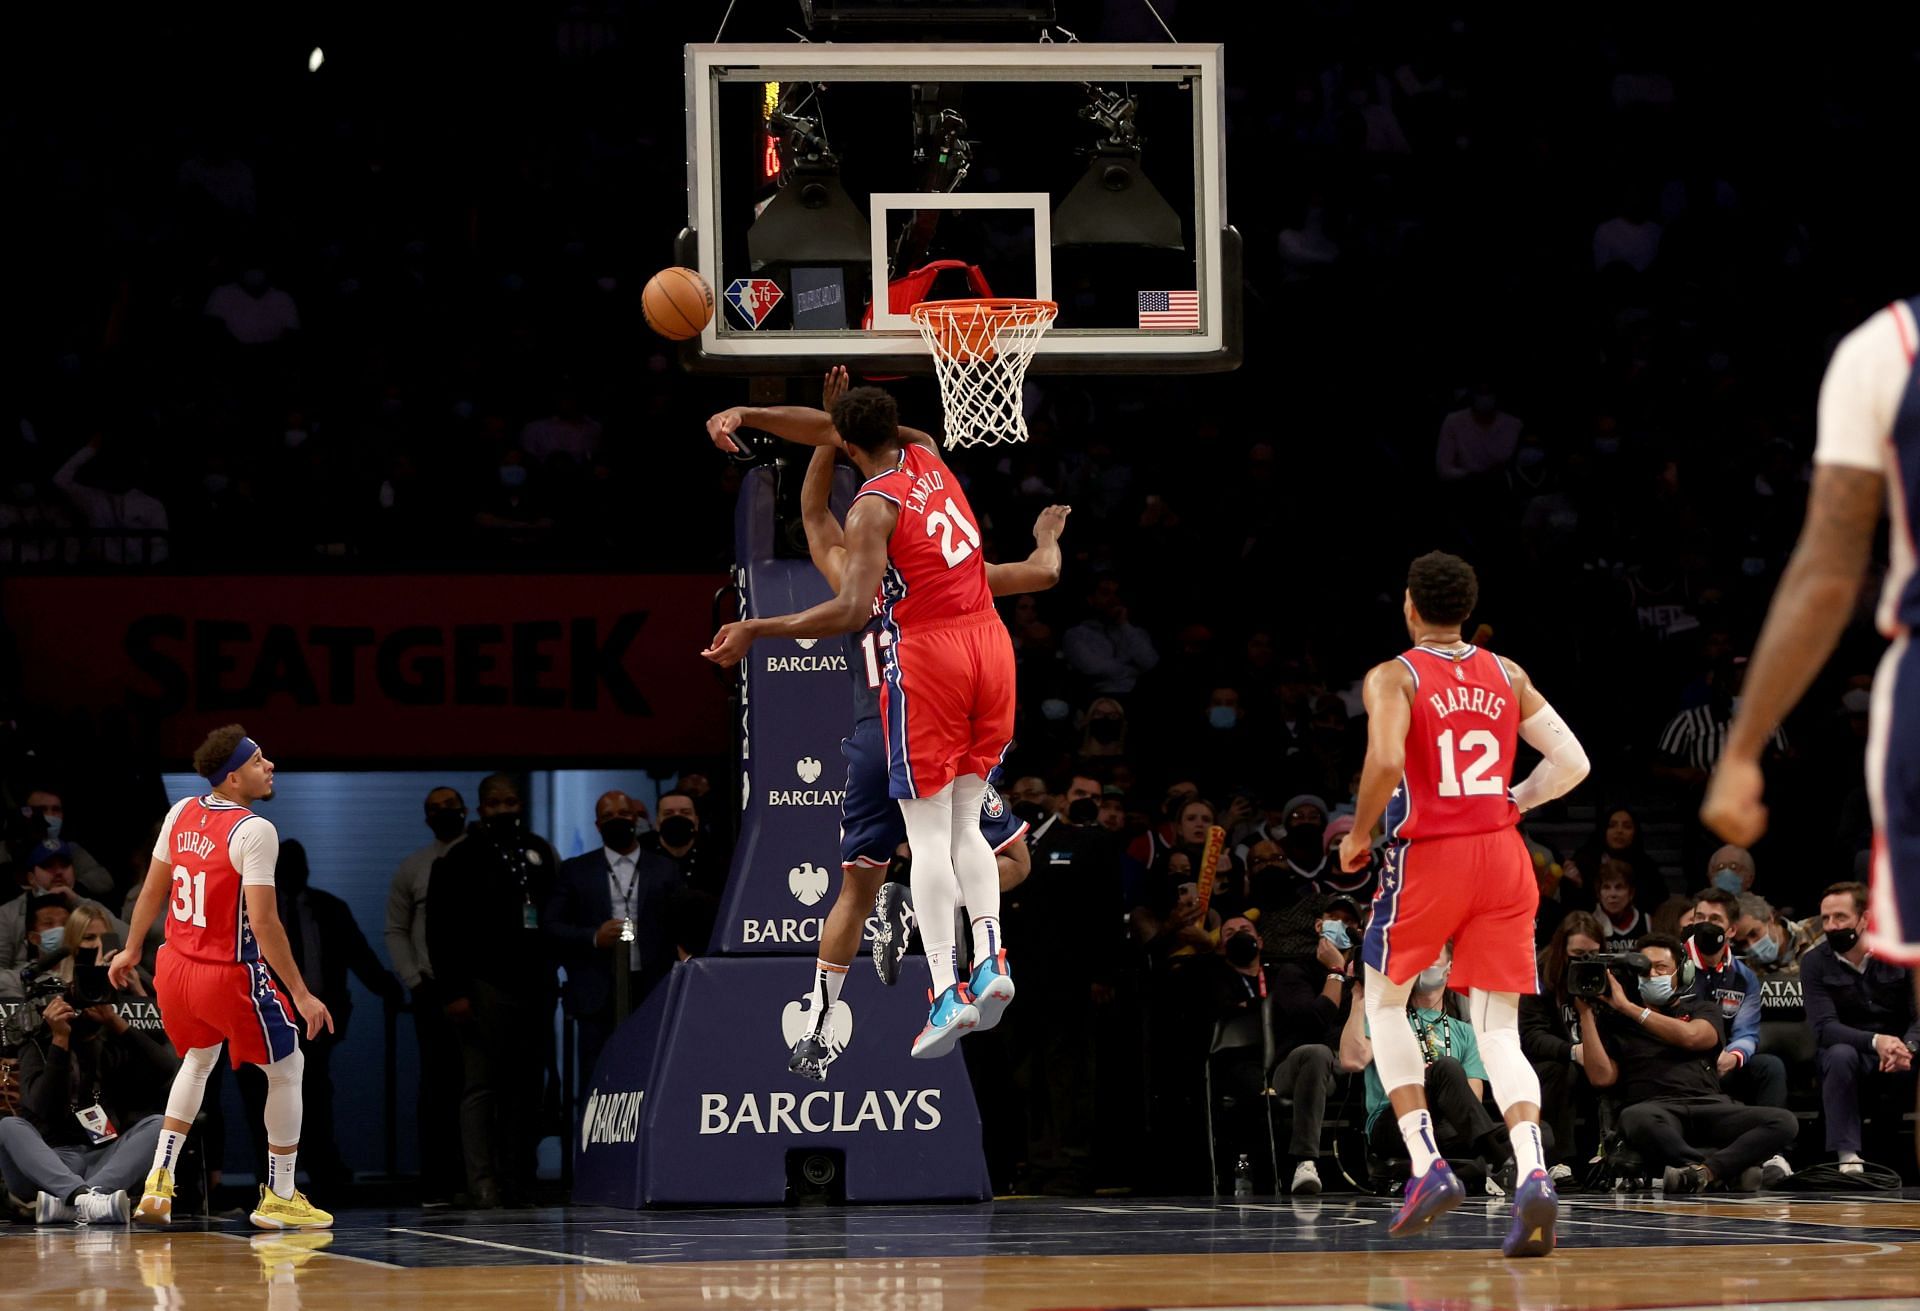 Joel Embiid of the Philadelphia 76ers blocks a layup by James Harden of the Brooklyn Nets on Dec. 30 in New York City.